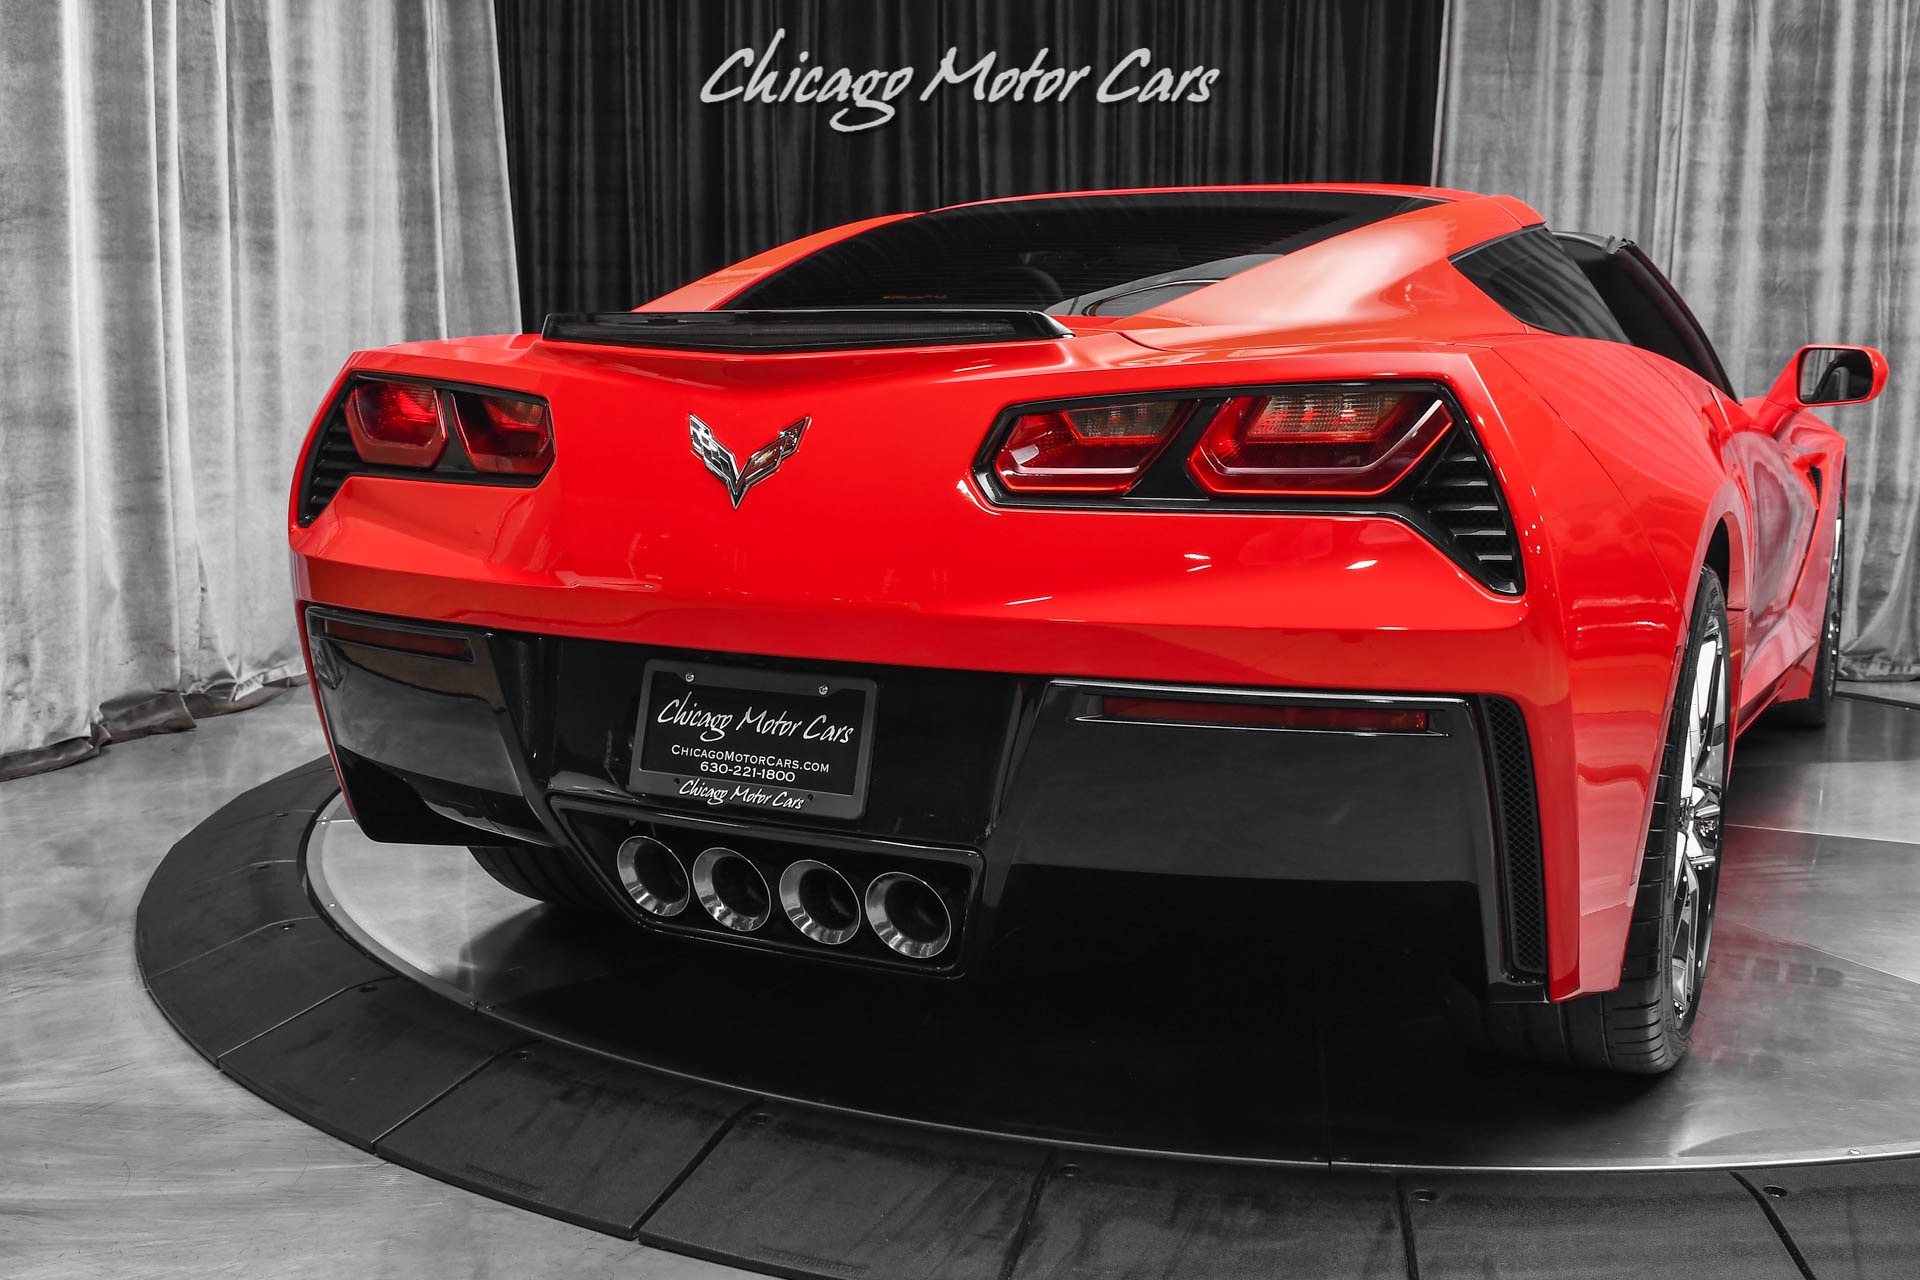 Used-2014-Chevrolet-Corvette-Stingray-2LT-7-Speed-Manual-100k-In-Upgrades-Supercharged